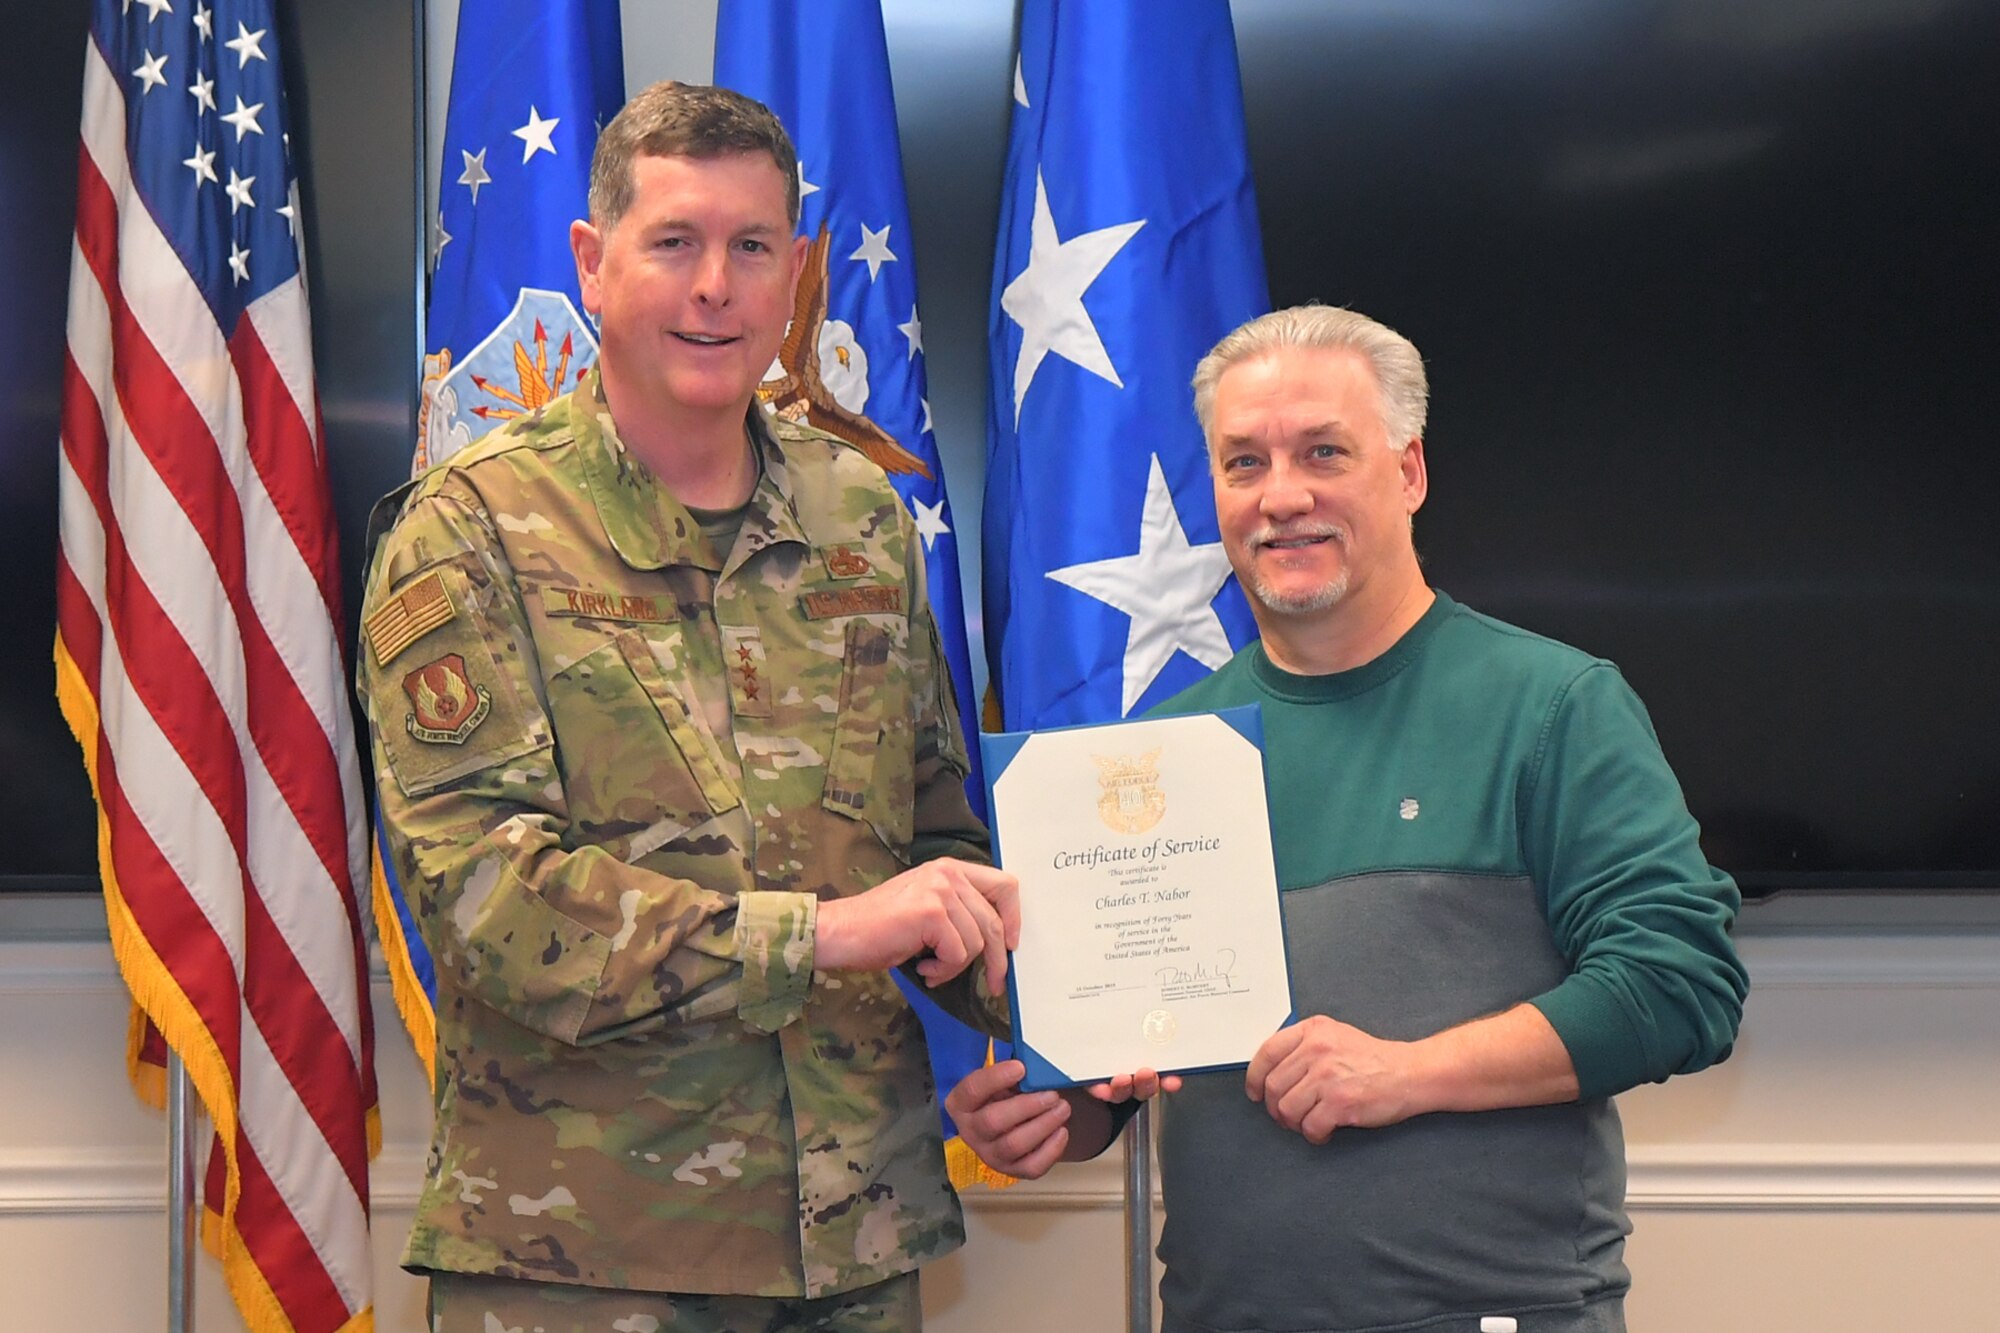 Charles T. Nabor, 524th Electronic Maintenance Squadron, receives a 40-year certificate of service from Lt. Gen Gene Kirkland, Air Force Sustainment Center commander, Feb. 4, 2019, at Hill Air Force Base, Utah. (U.S. Air Force photo by Todd Cromar)